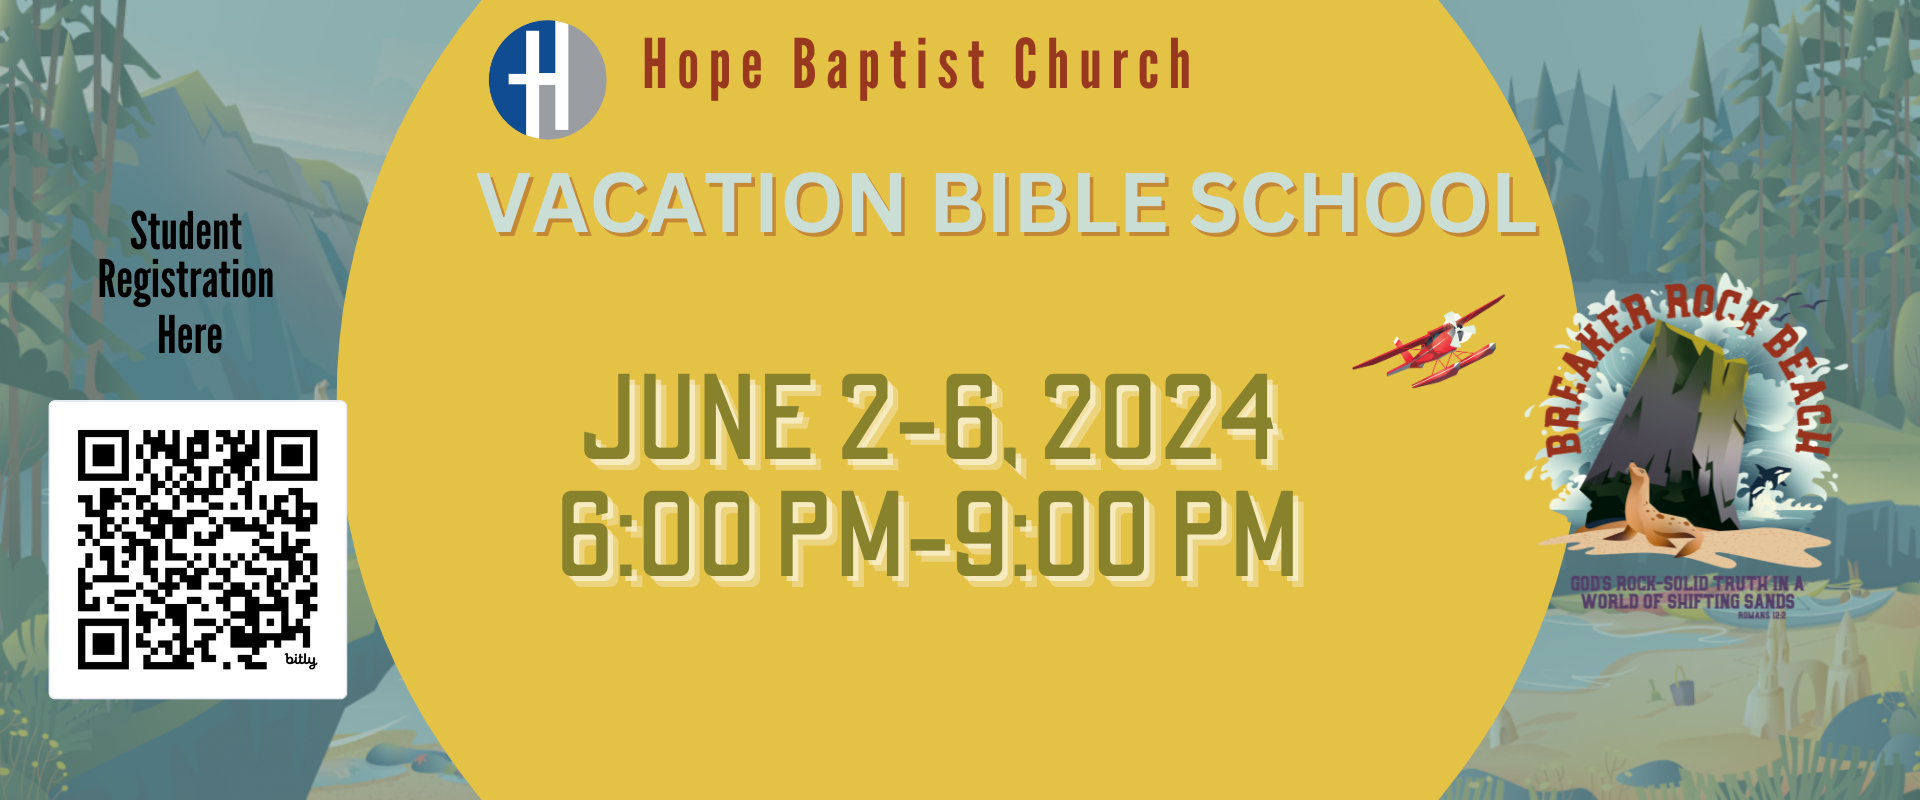 VBS POSTER (8.5 x 11 in) (2000 x 450 px) (1).png